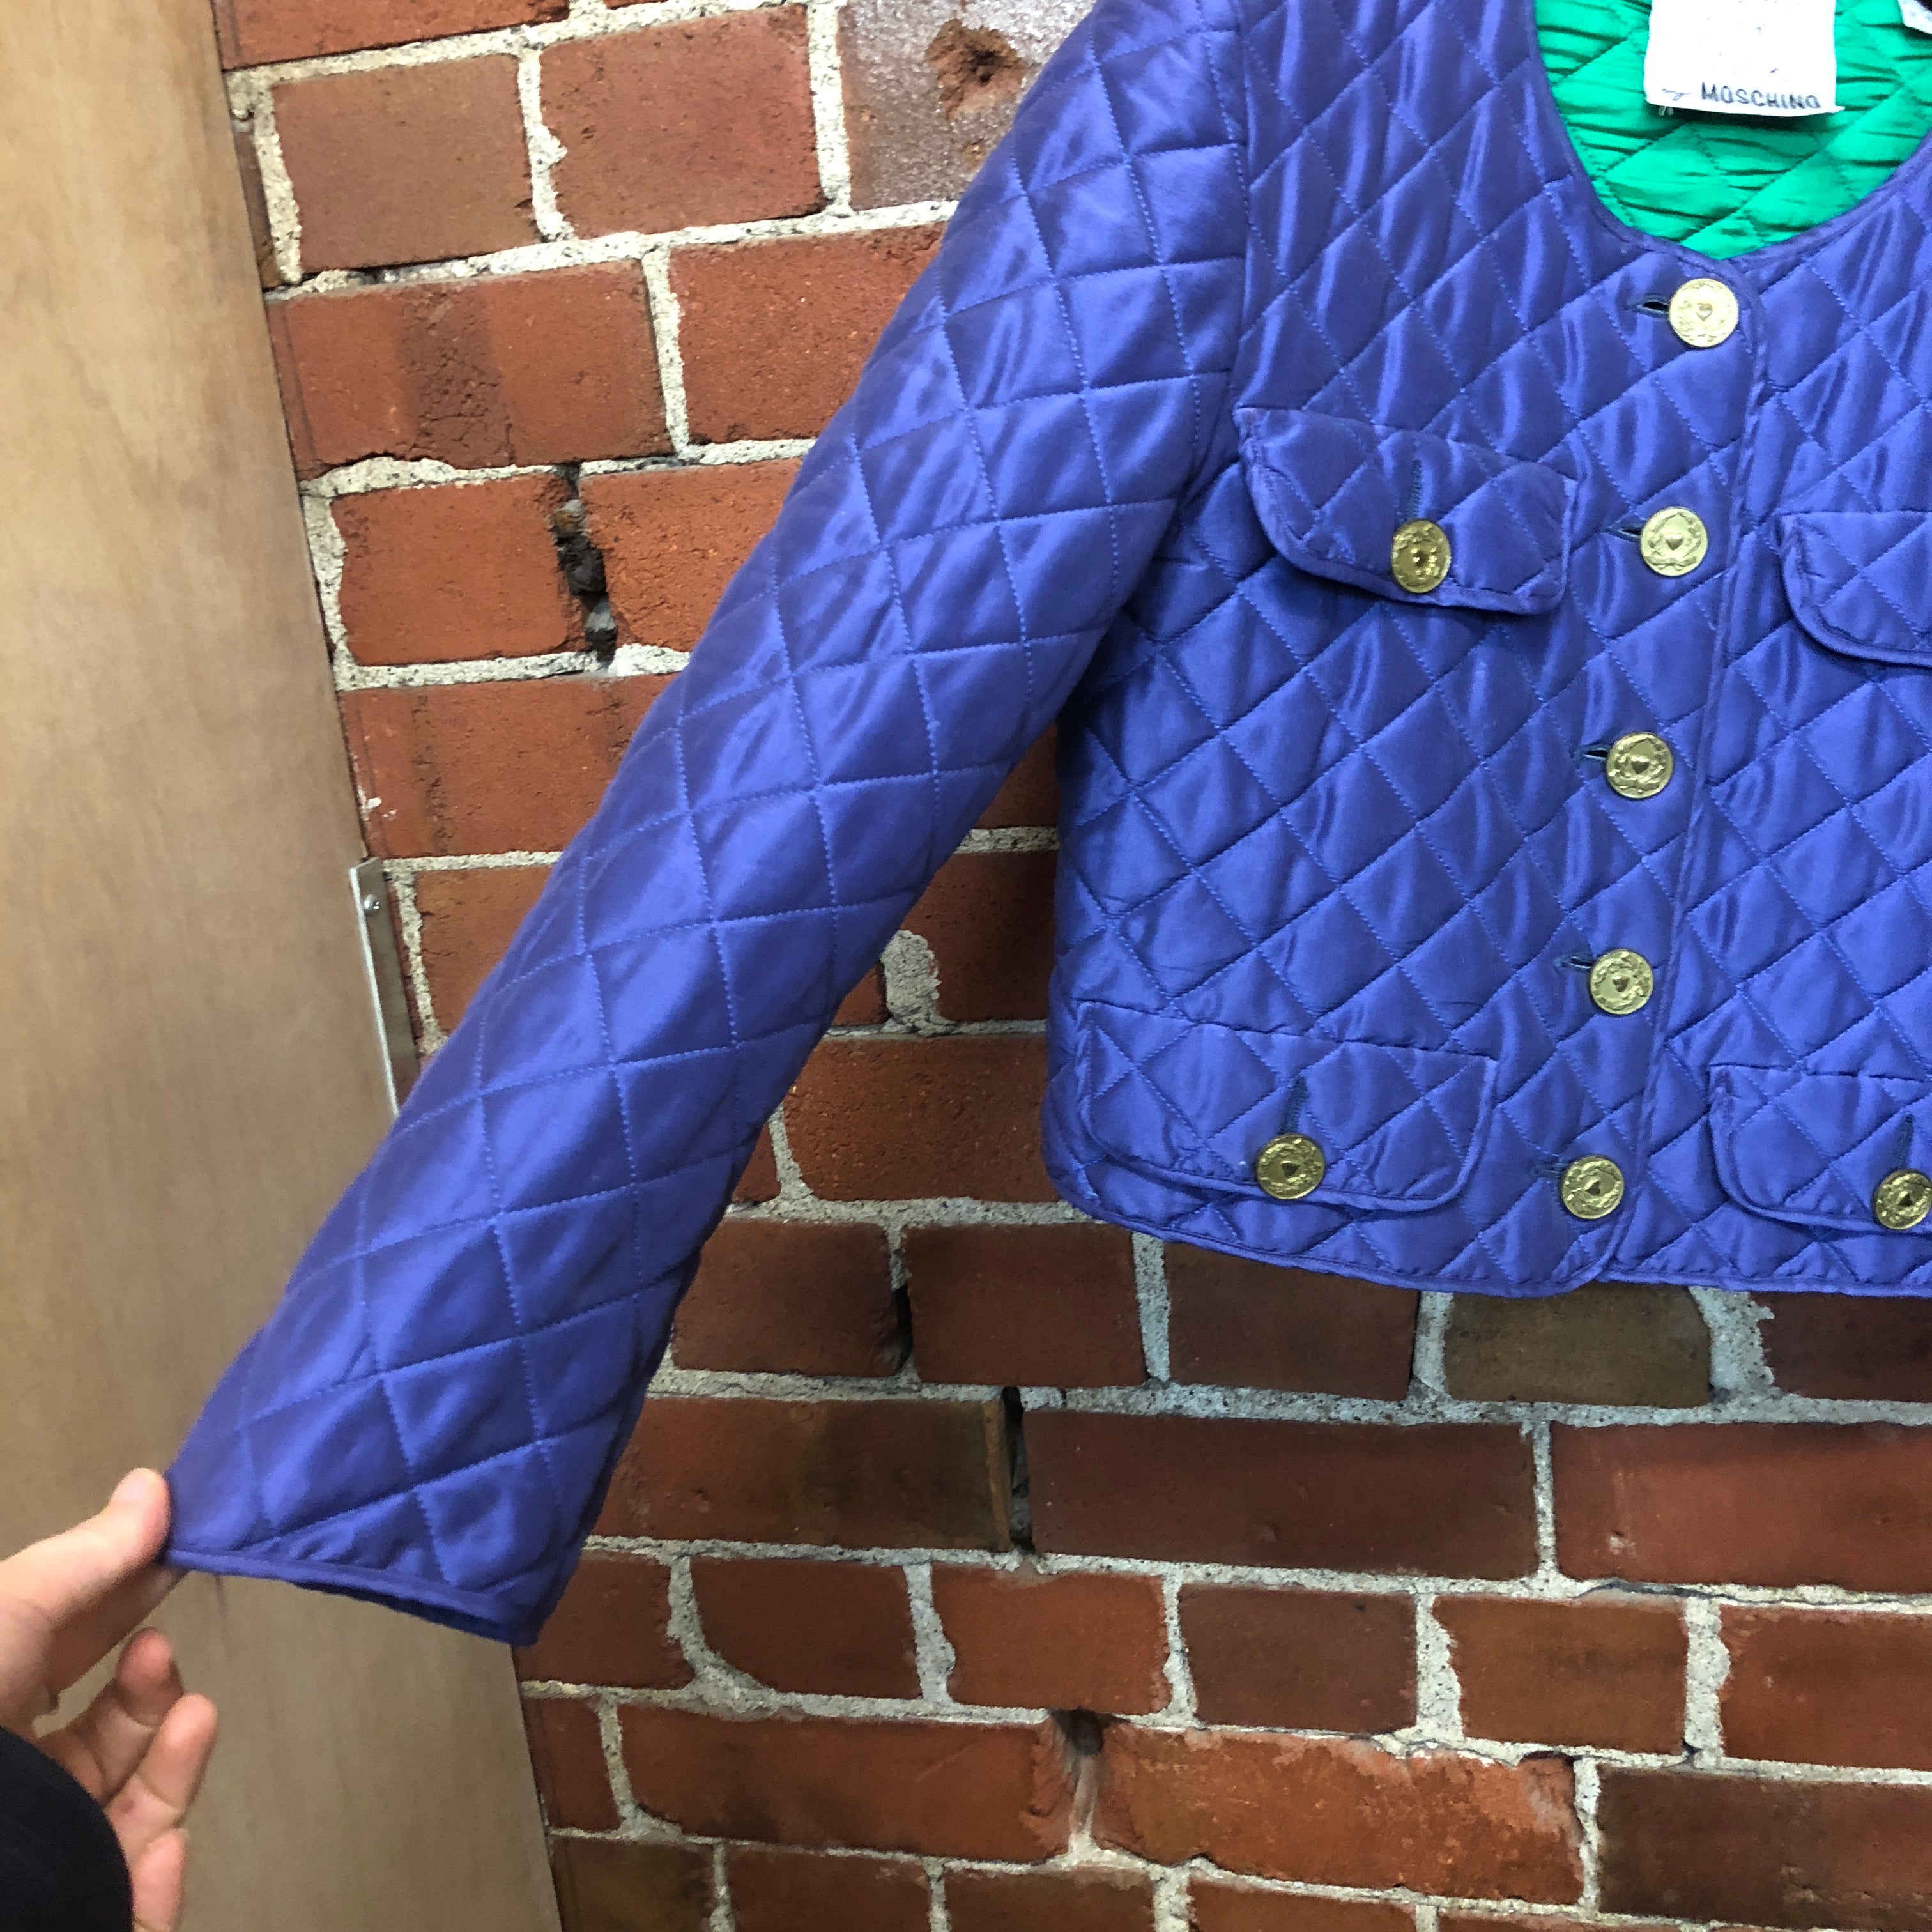 MOSCHINO 1980s quilted jacket